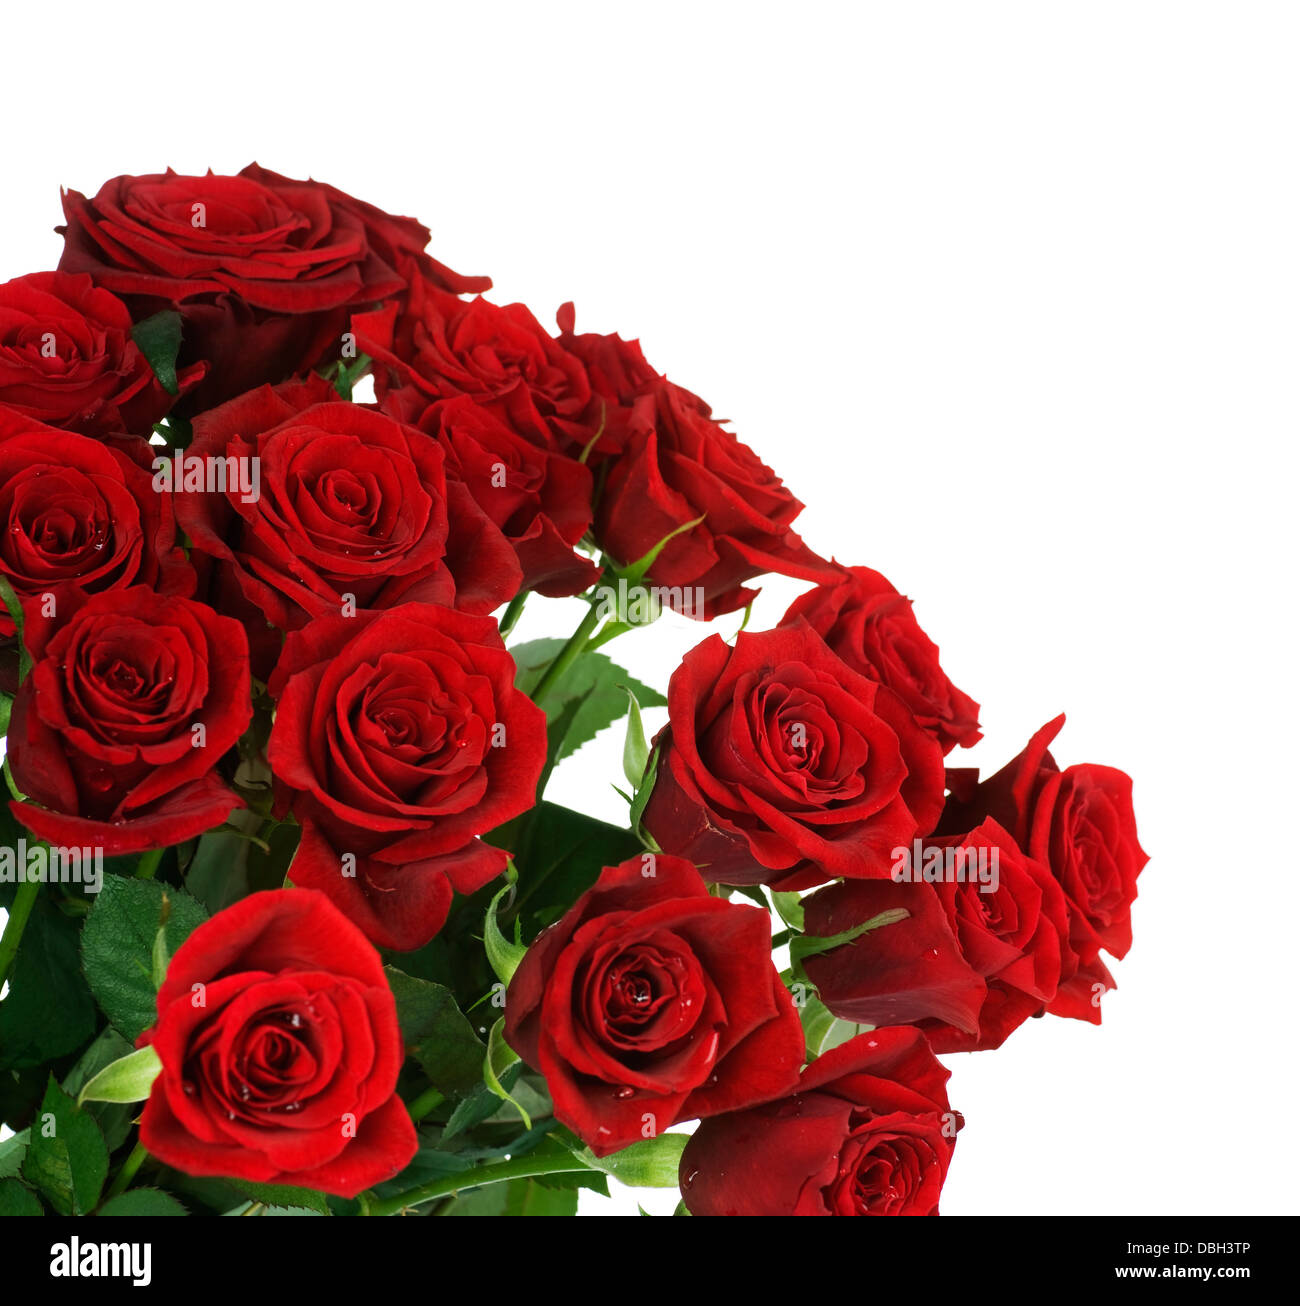 Big Red Roses Bouquet Stock Photo - Alamy